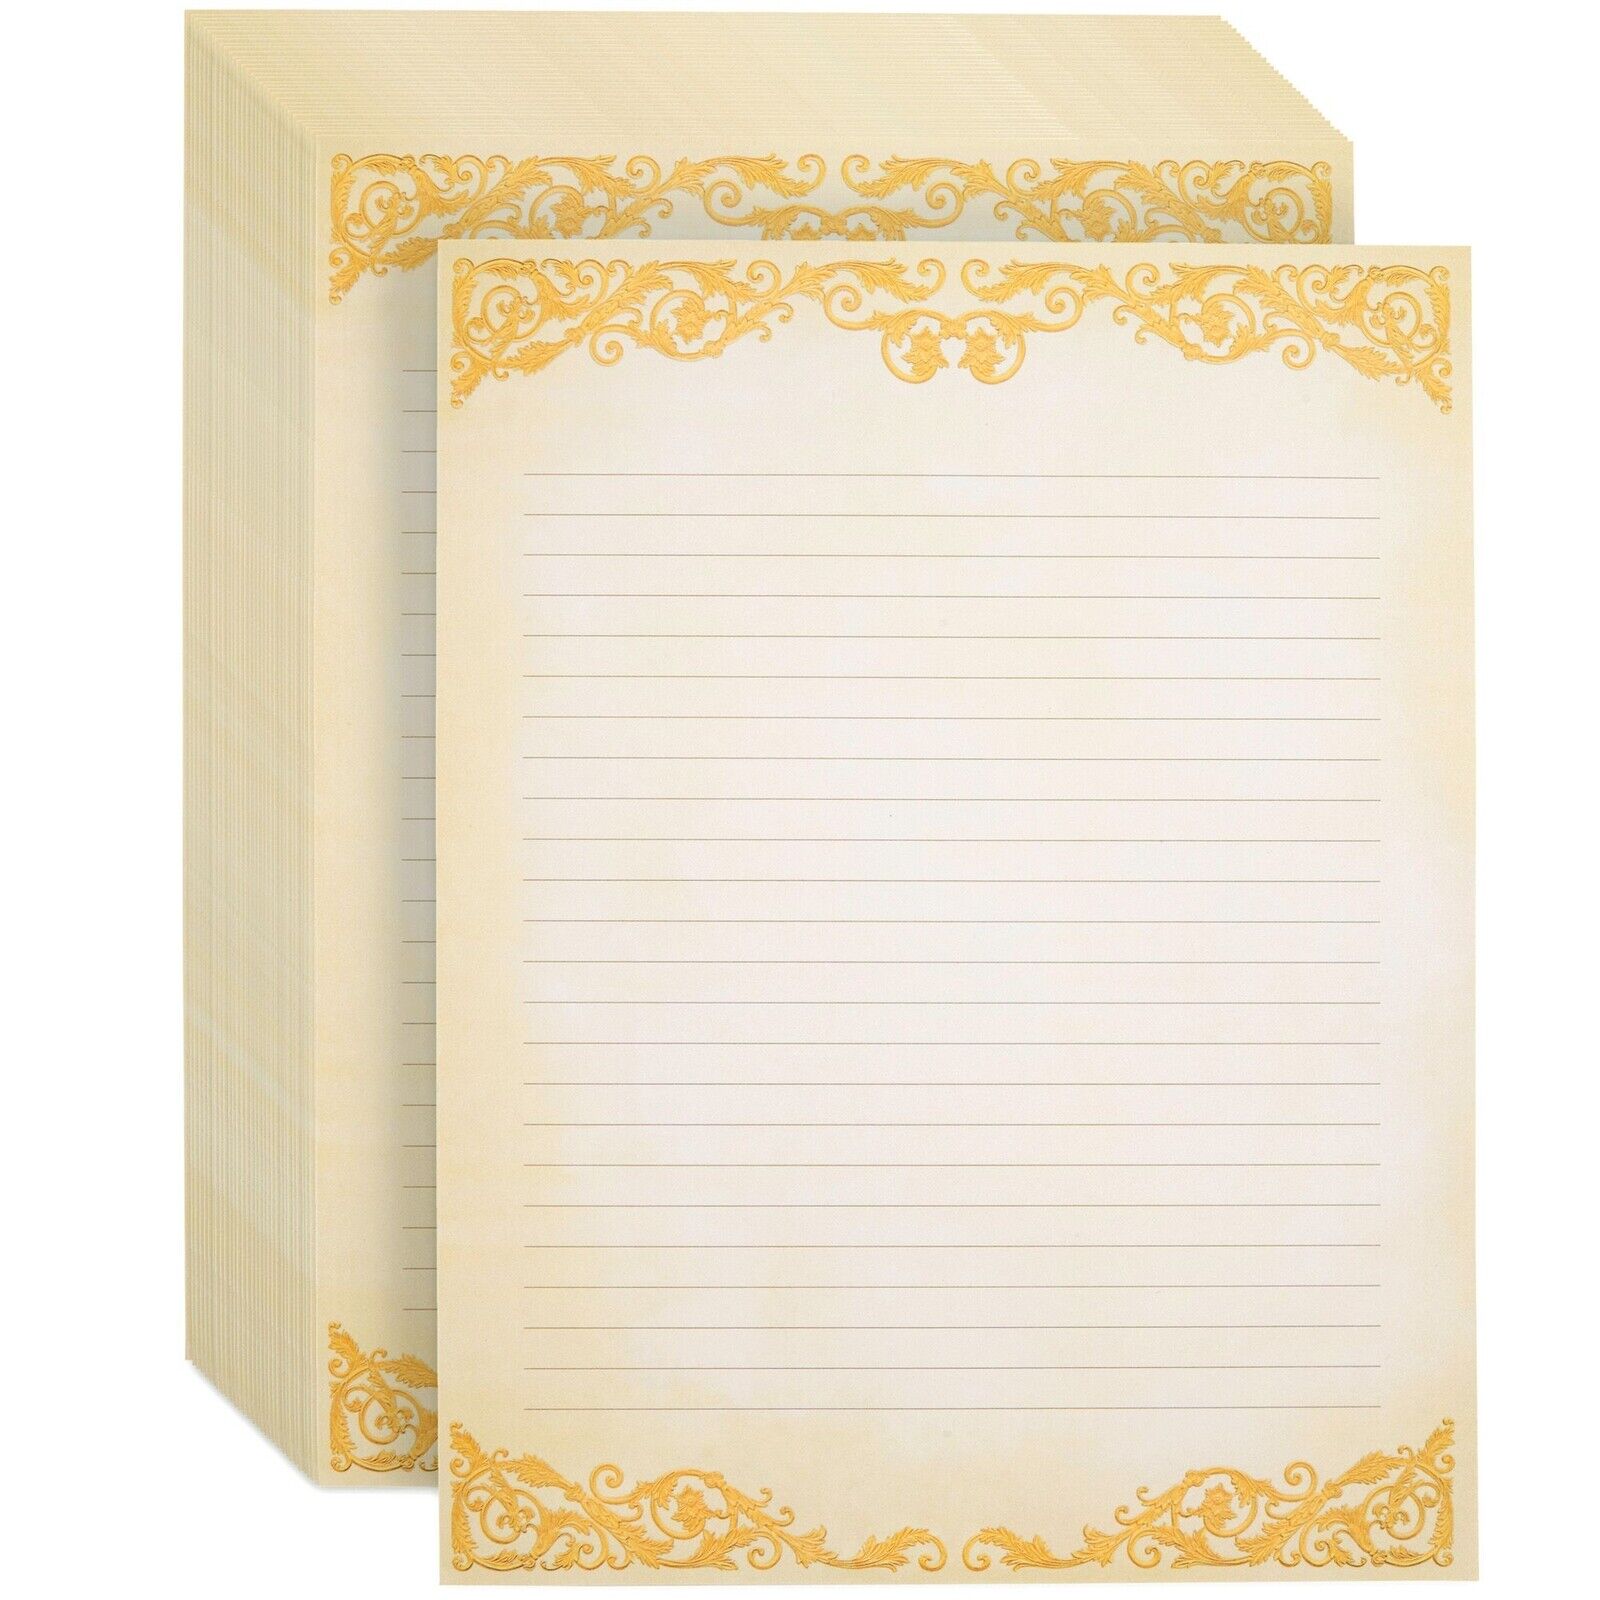 48-Pack Vintage-Style Stationery Paper Classic Gold Border Old Fashioned 8.5x11\